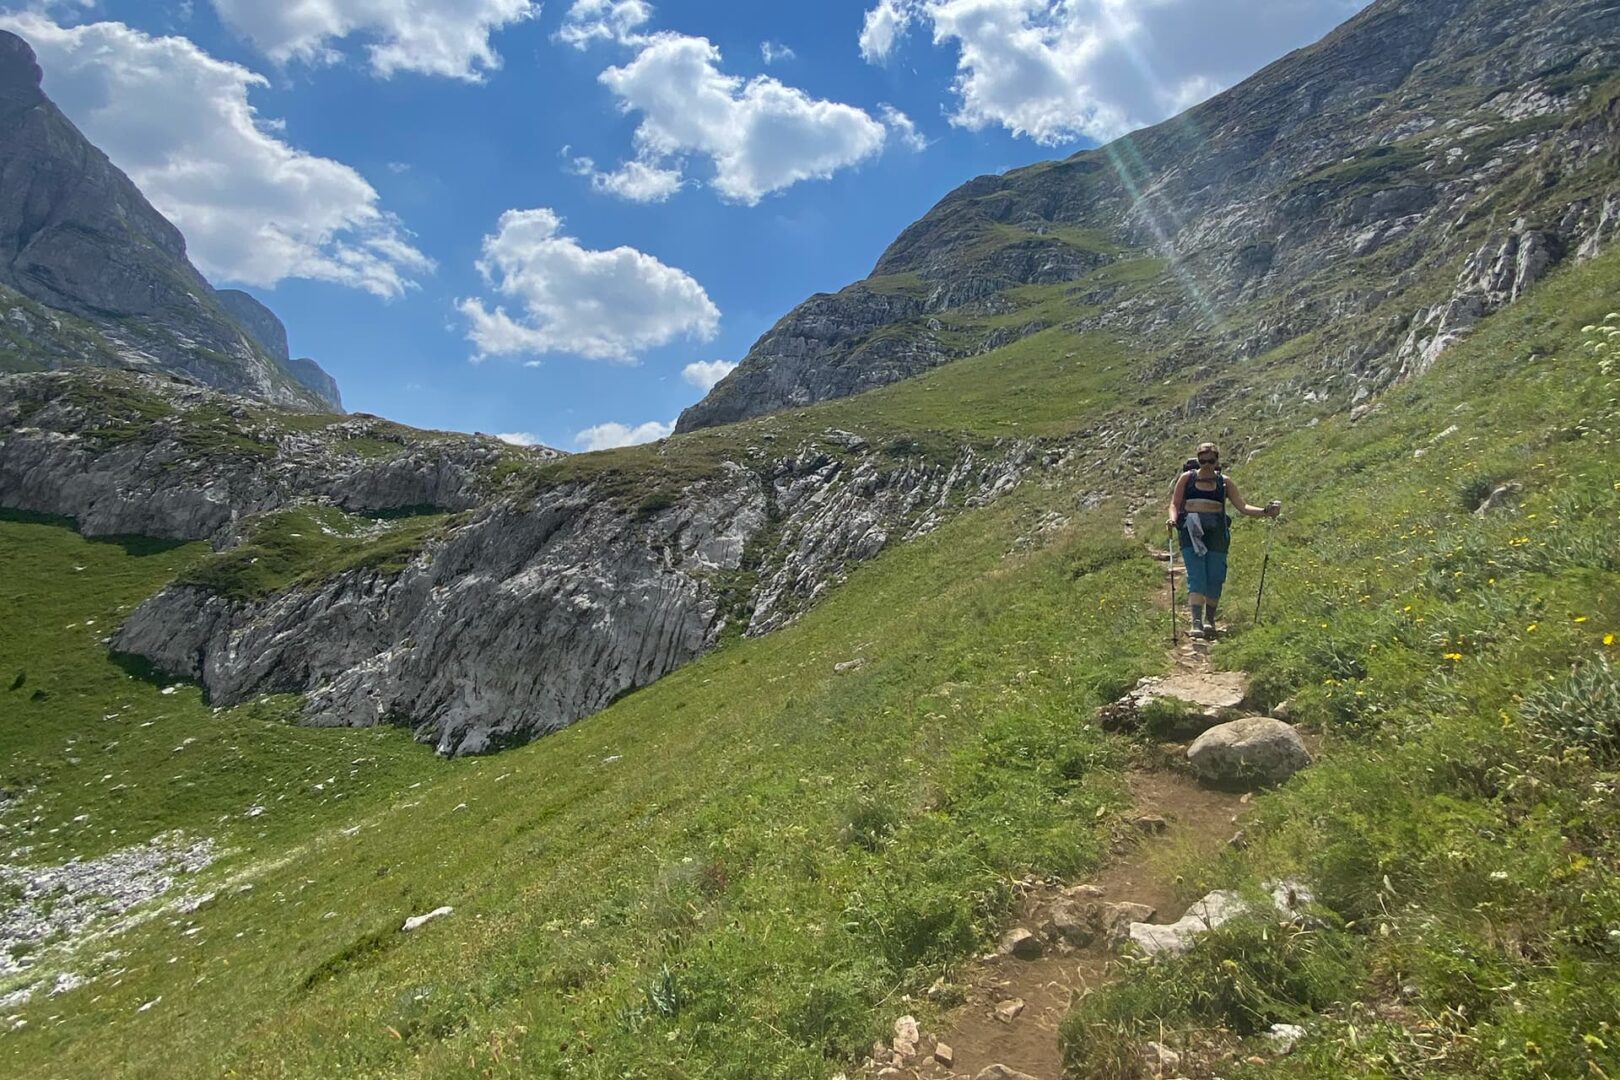 Person hiking on small mountain path in grass covered mountains